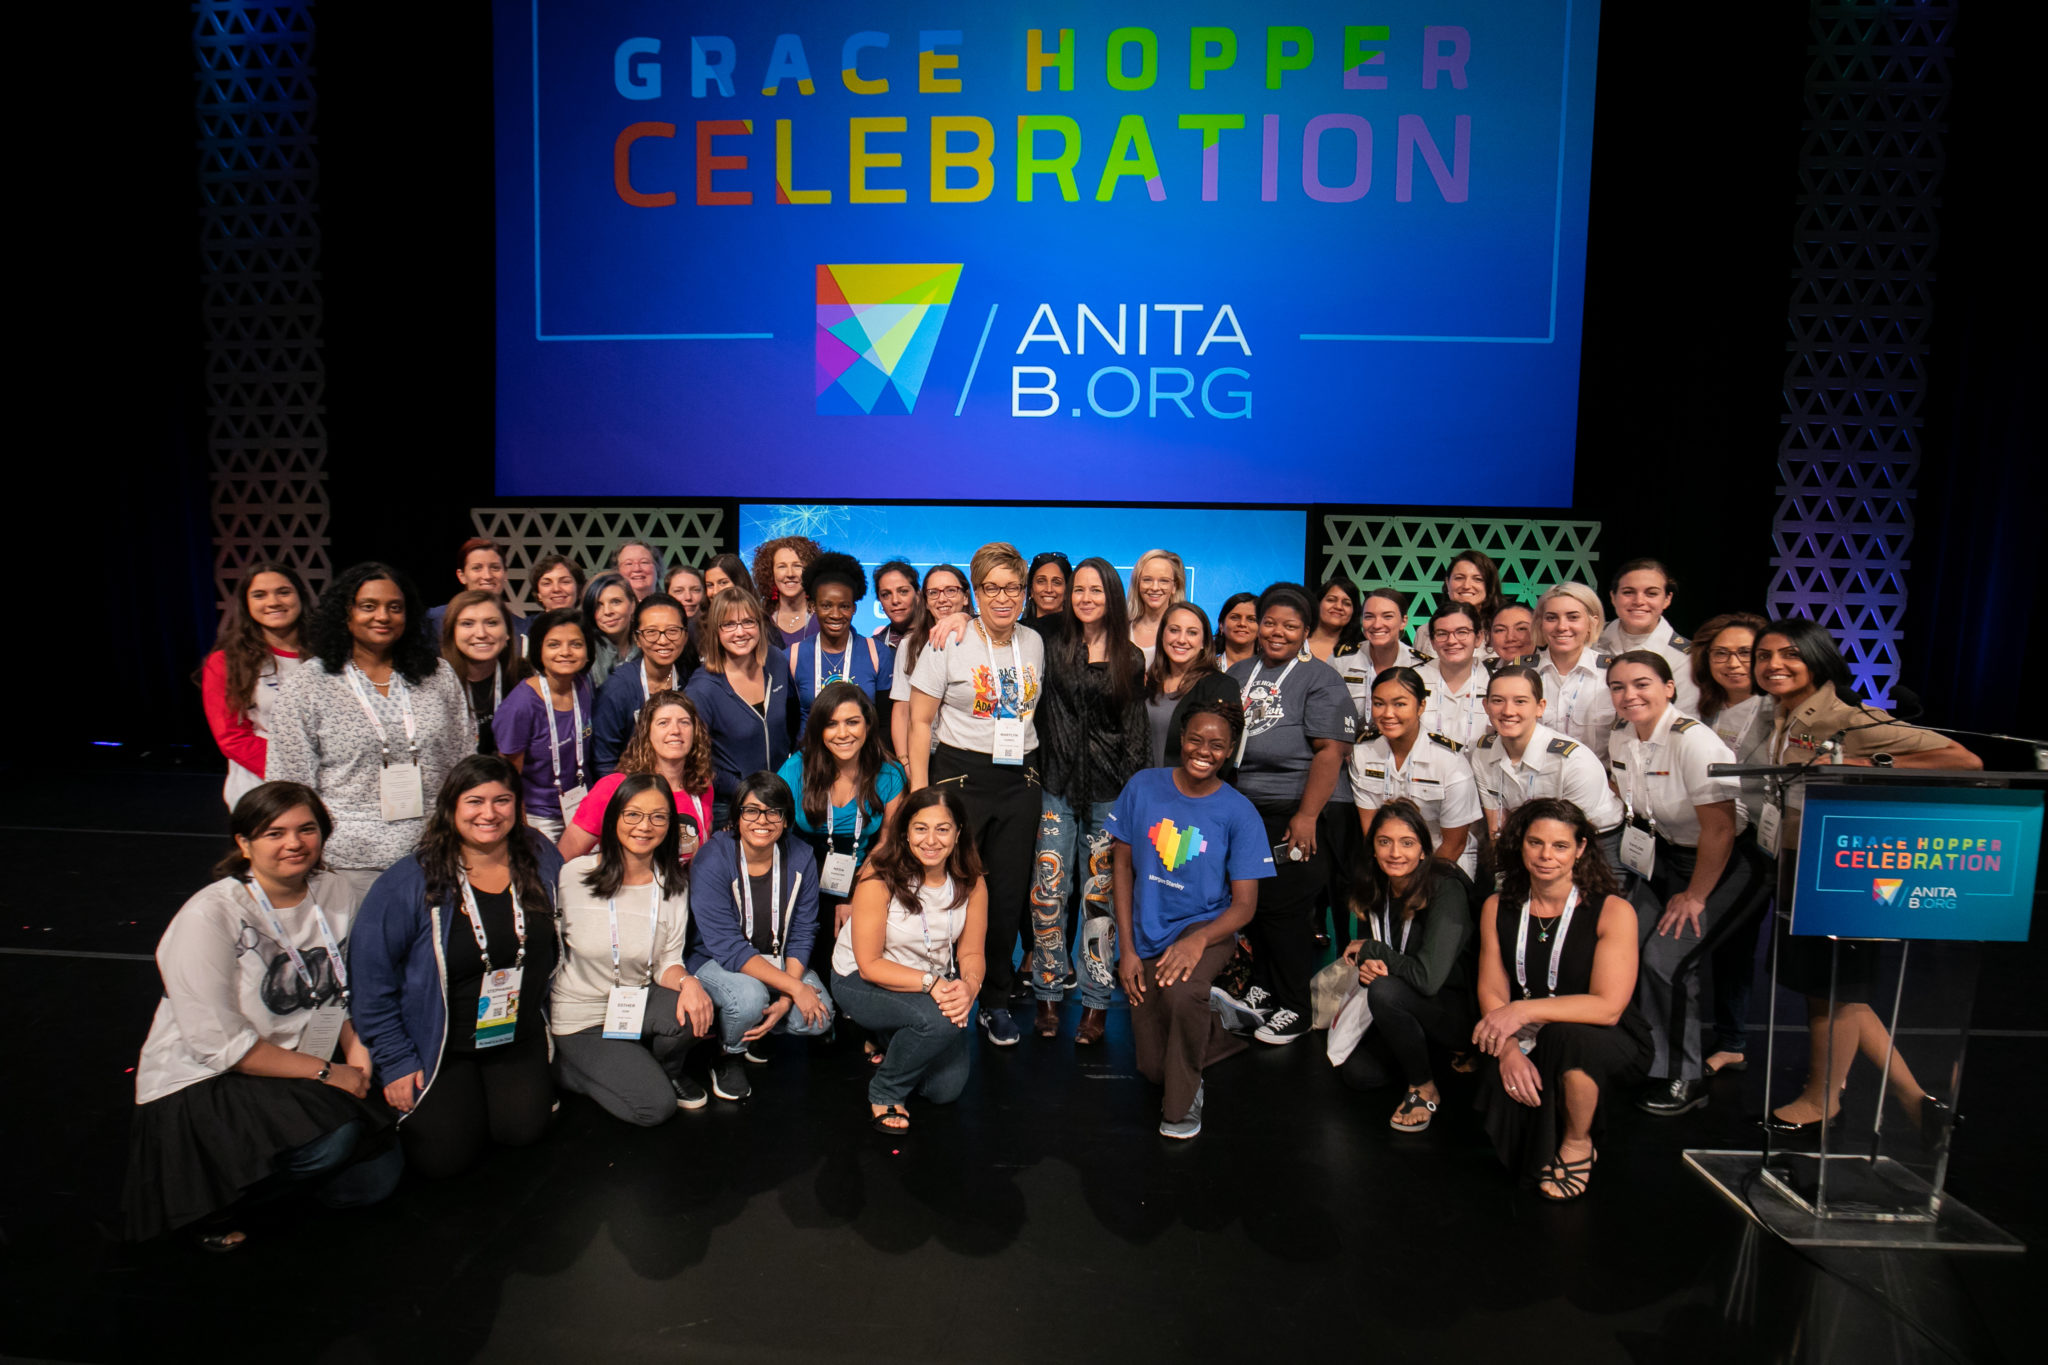 ghc-19-attendees-on-stage